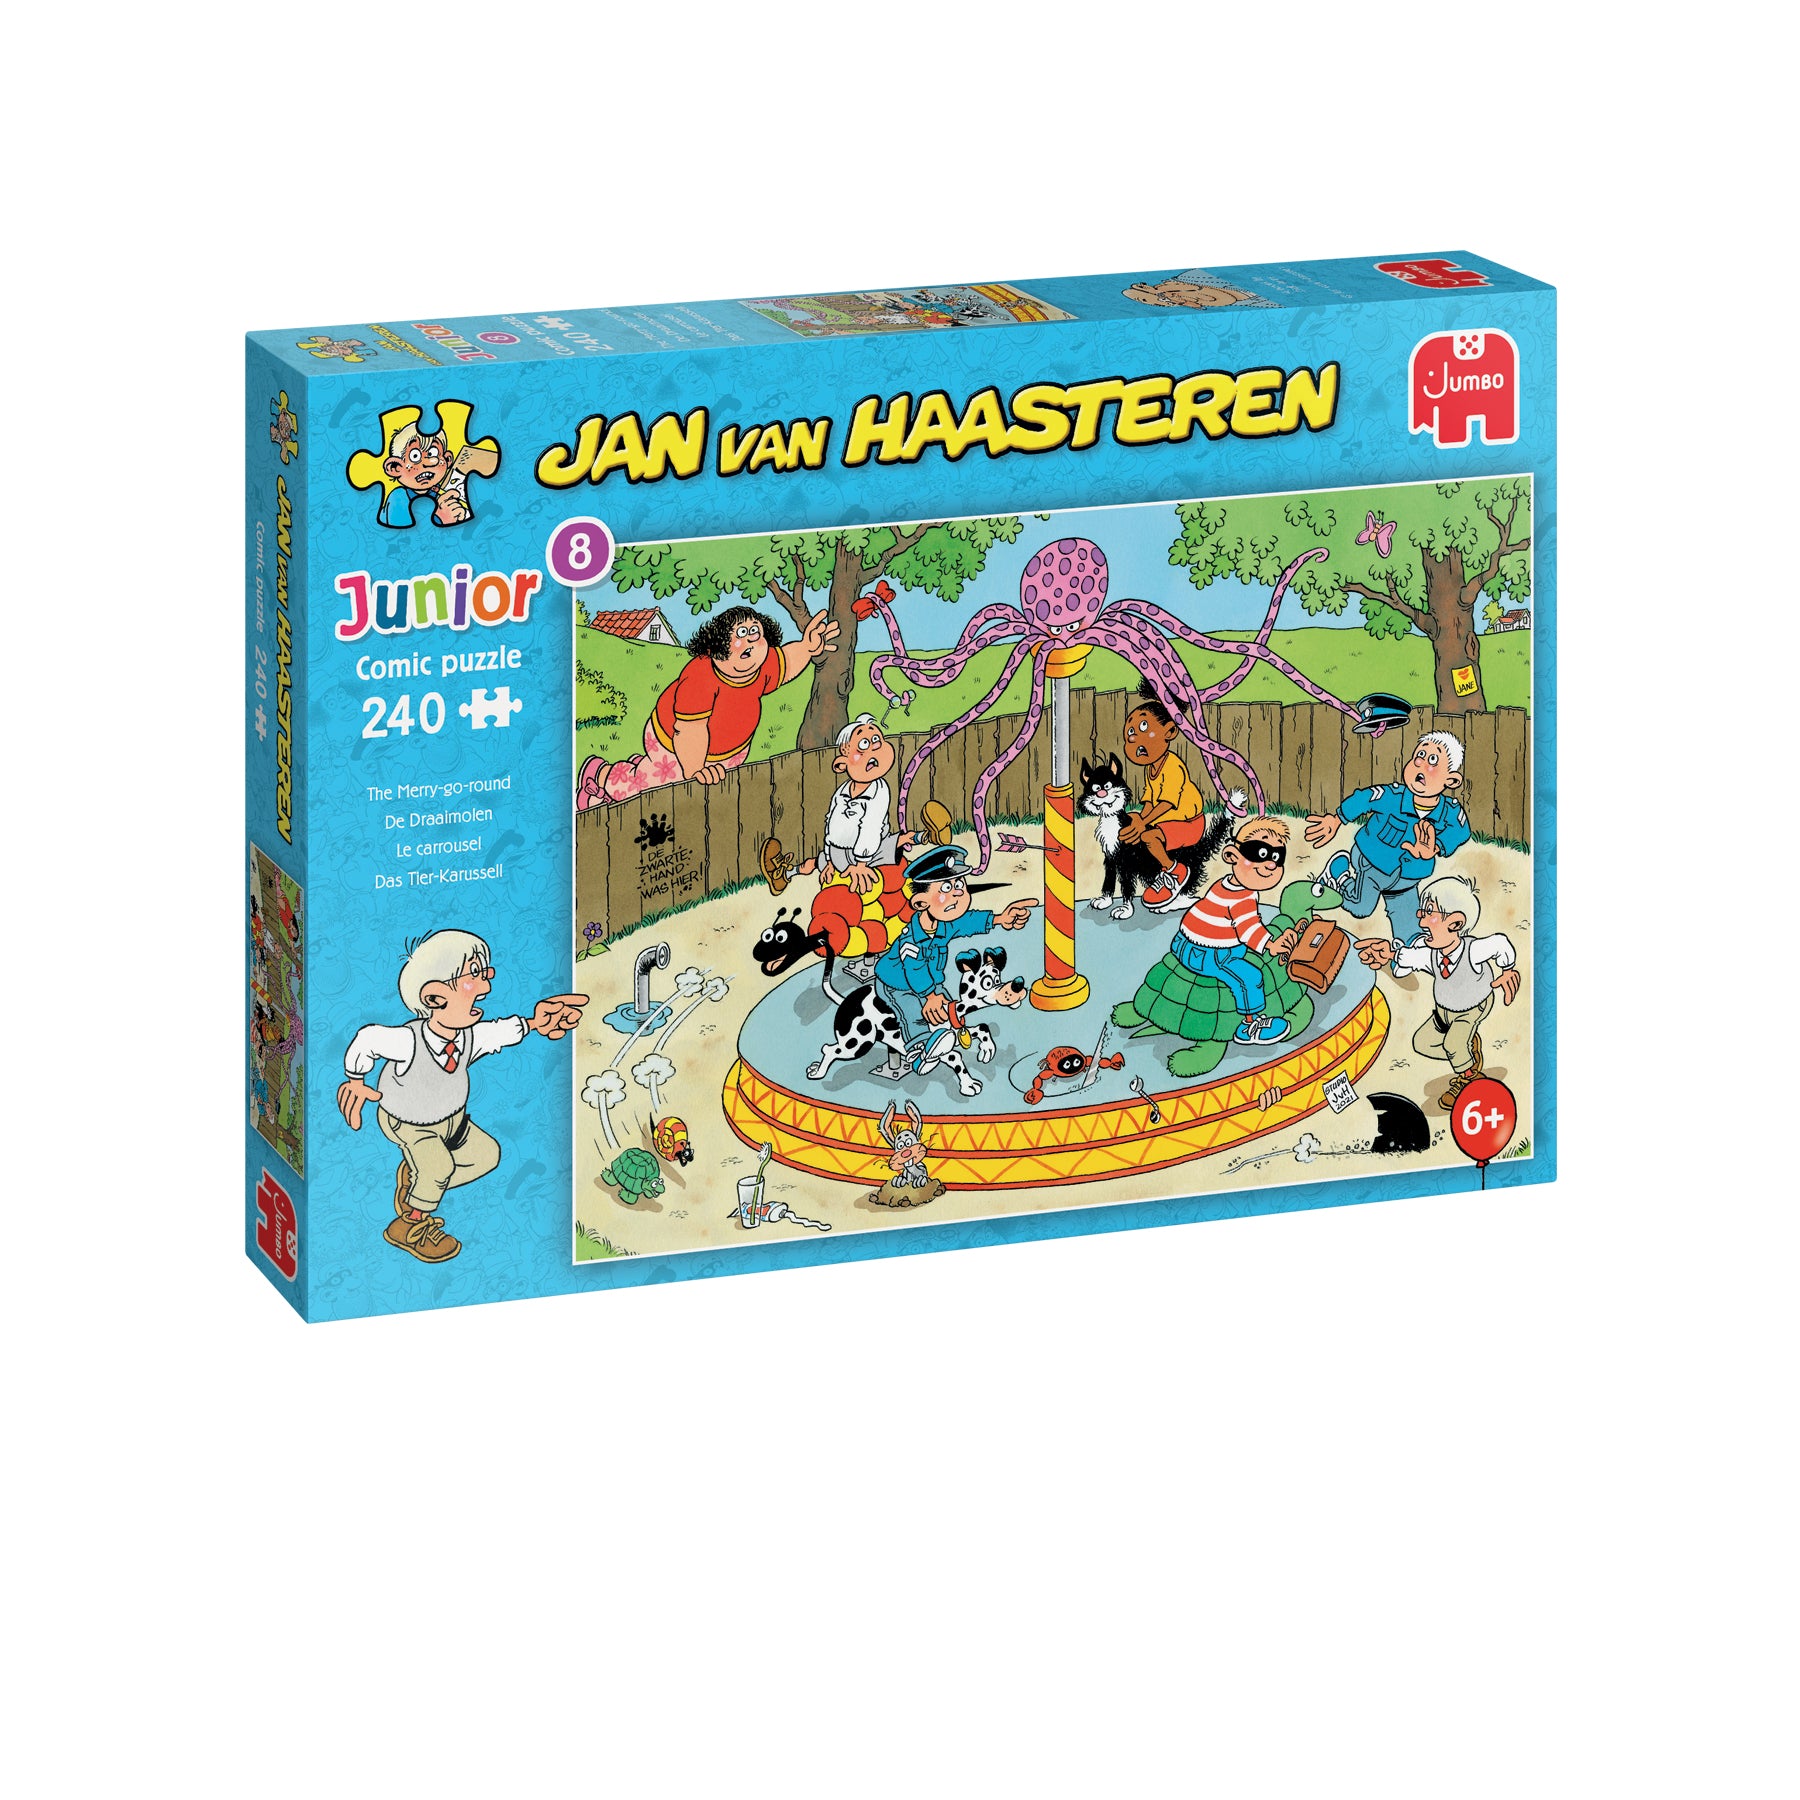 JvH Junior 8 The Merry-Go-Round 240 pieces - product image - Jumboplay.com